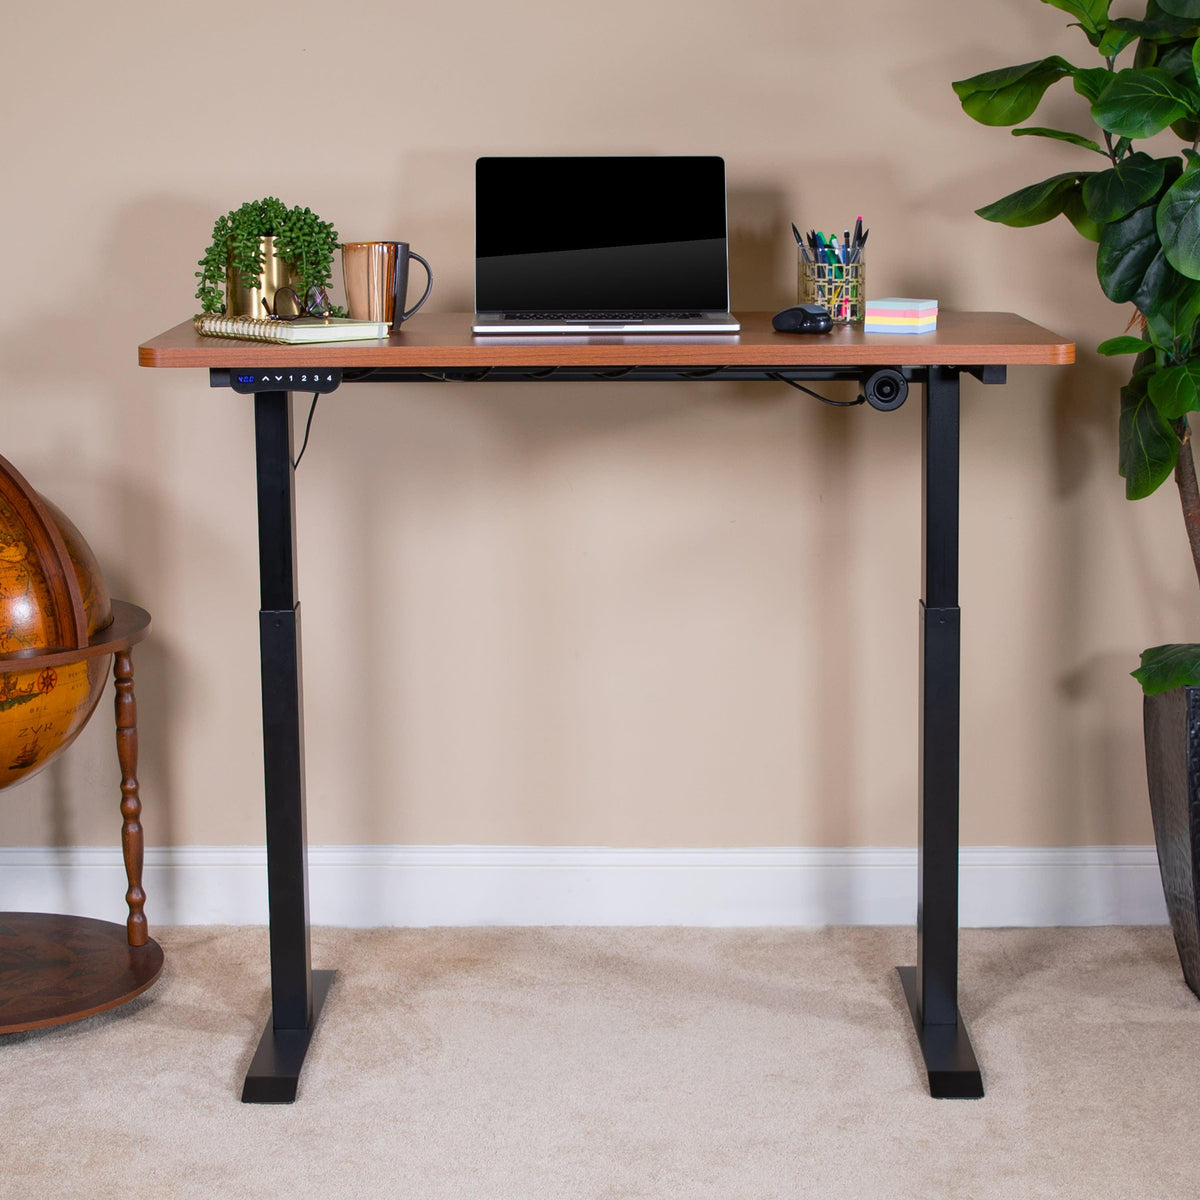 Mahogany |#| Electric Height Adjustable Standing Desk - 48inch Wide x 24inch Deep (Mahogany)